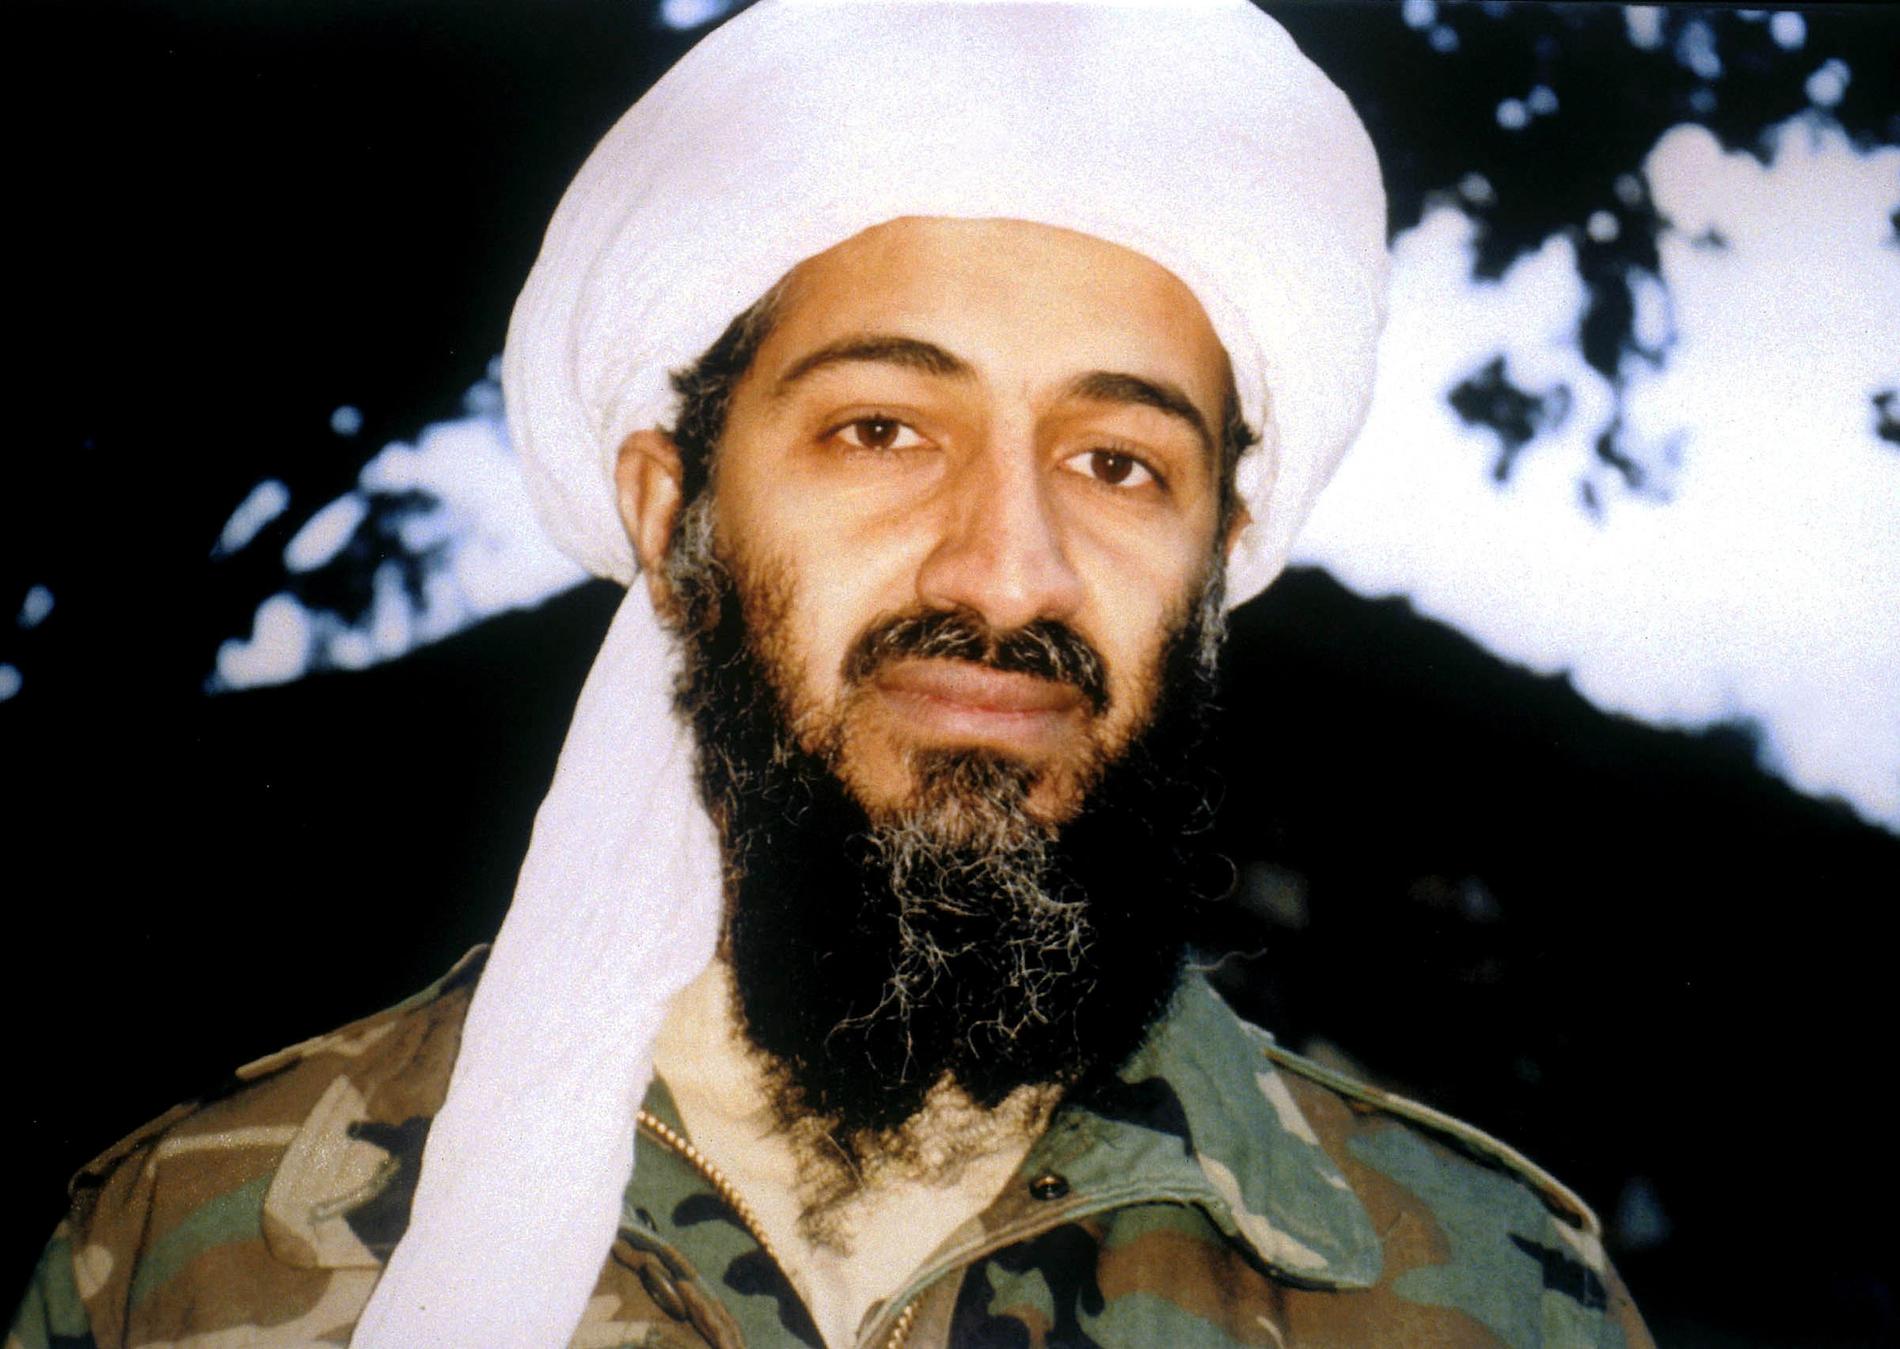 Bin Laden’s message removed after the TikTok pandemic